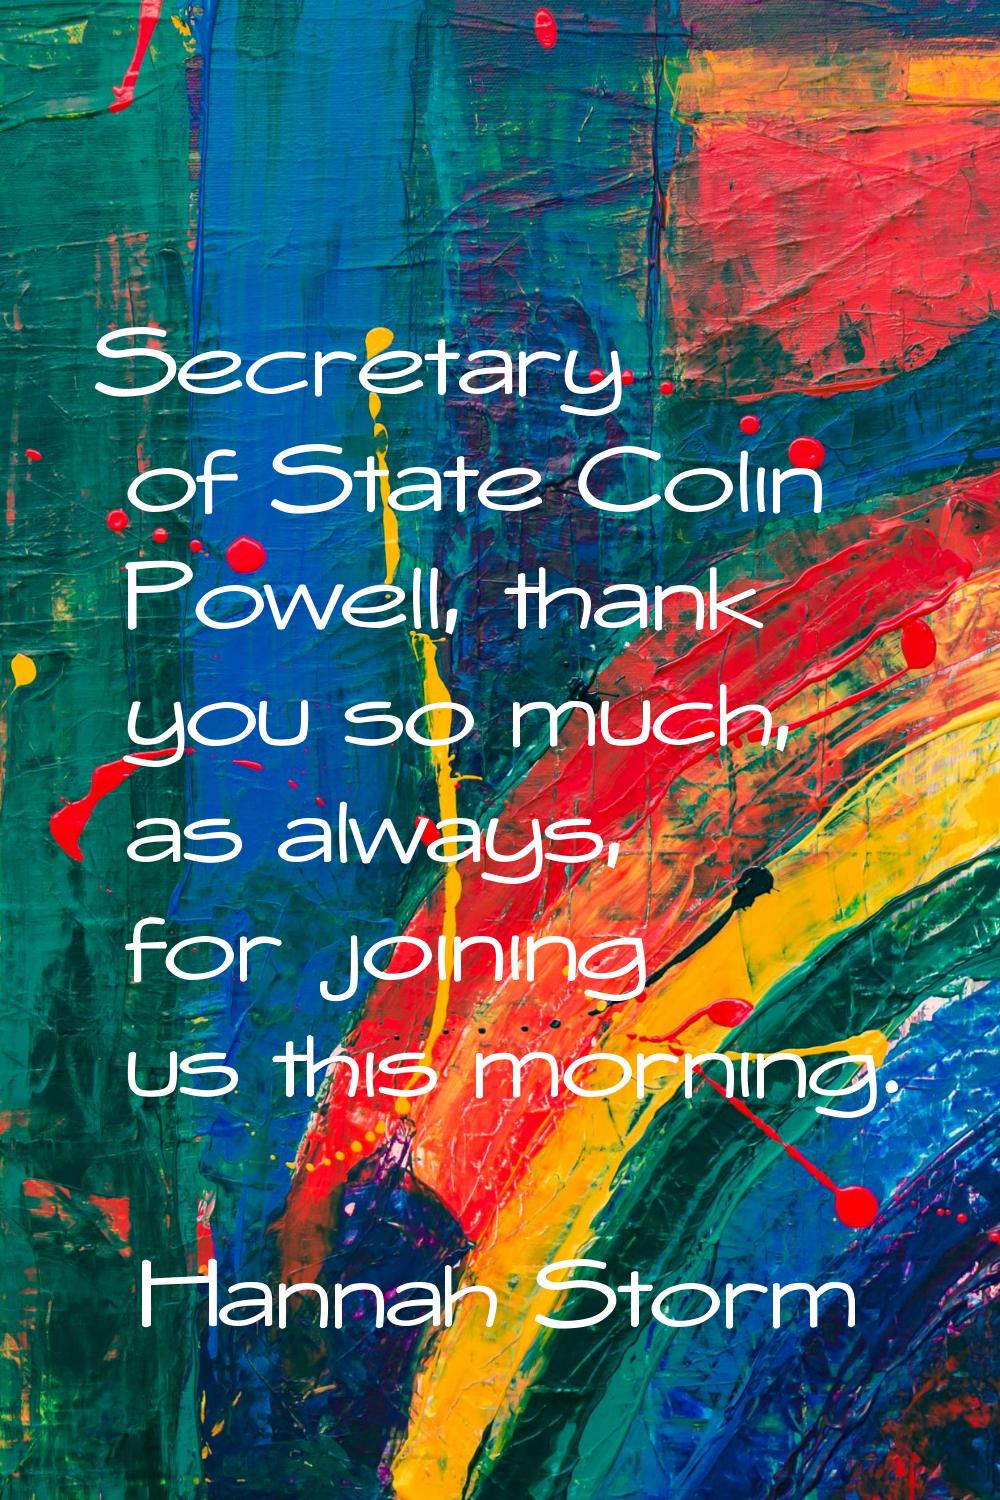 Secretary of State Colin Powell, thank you so much, as always, for joining us this morning.